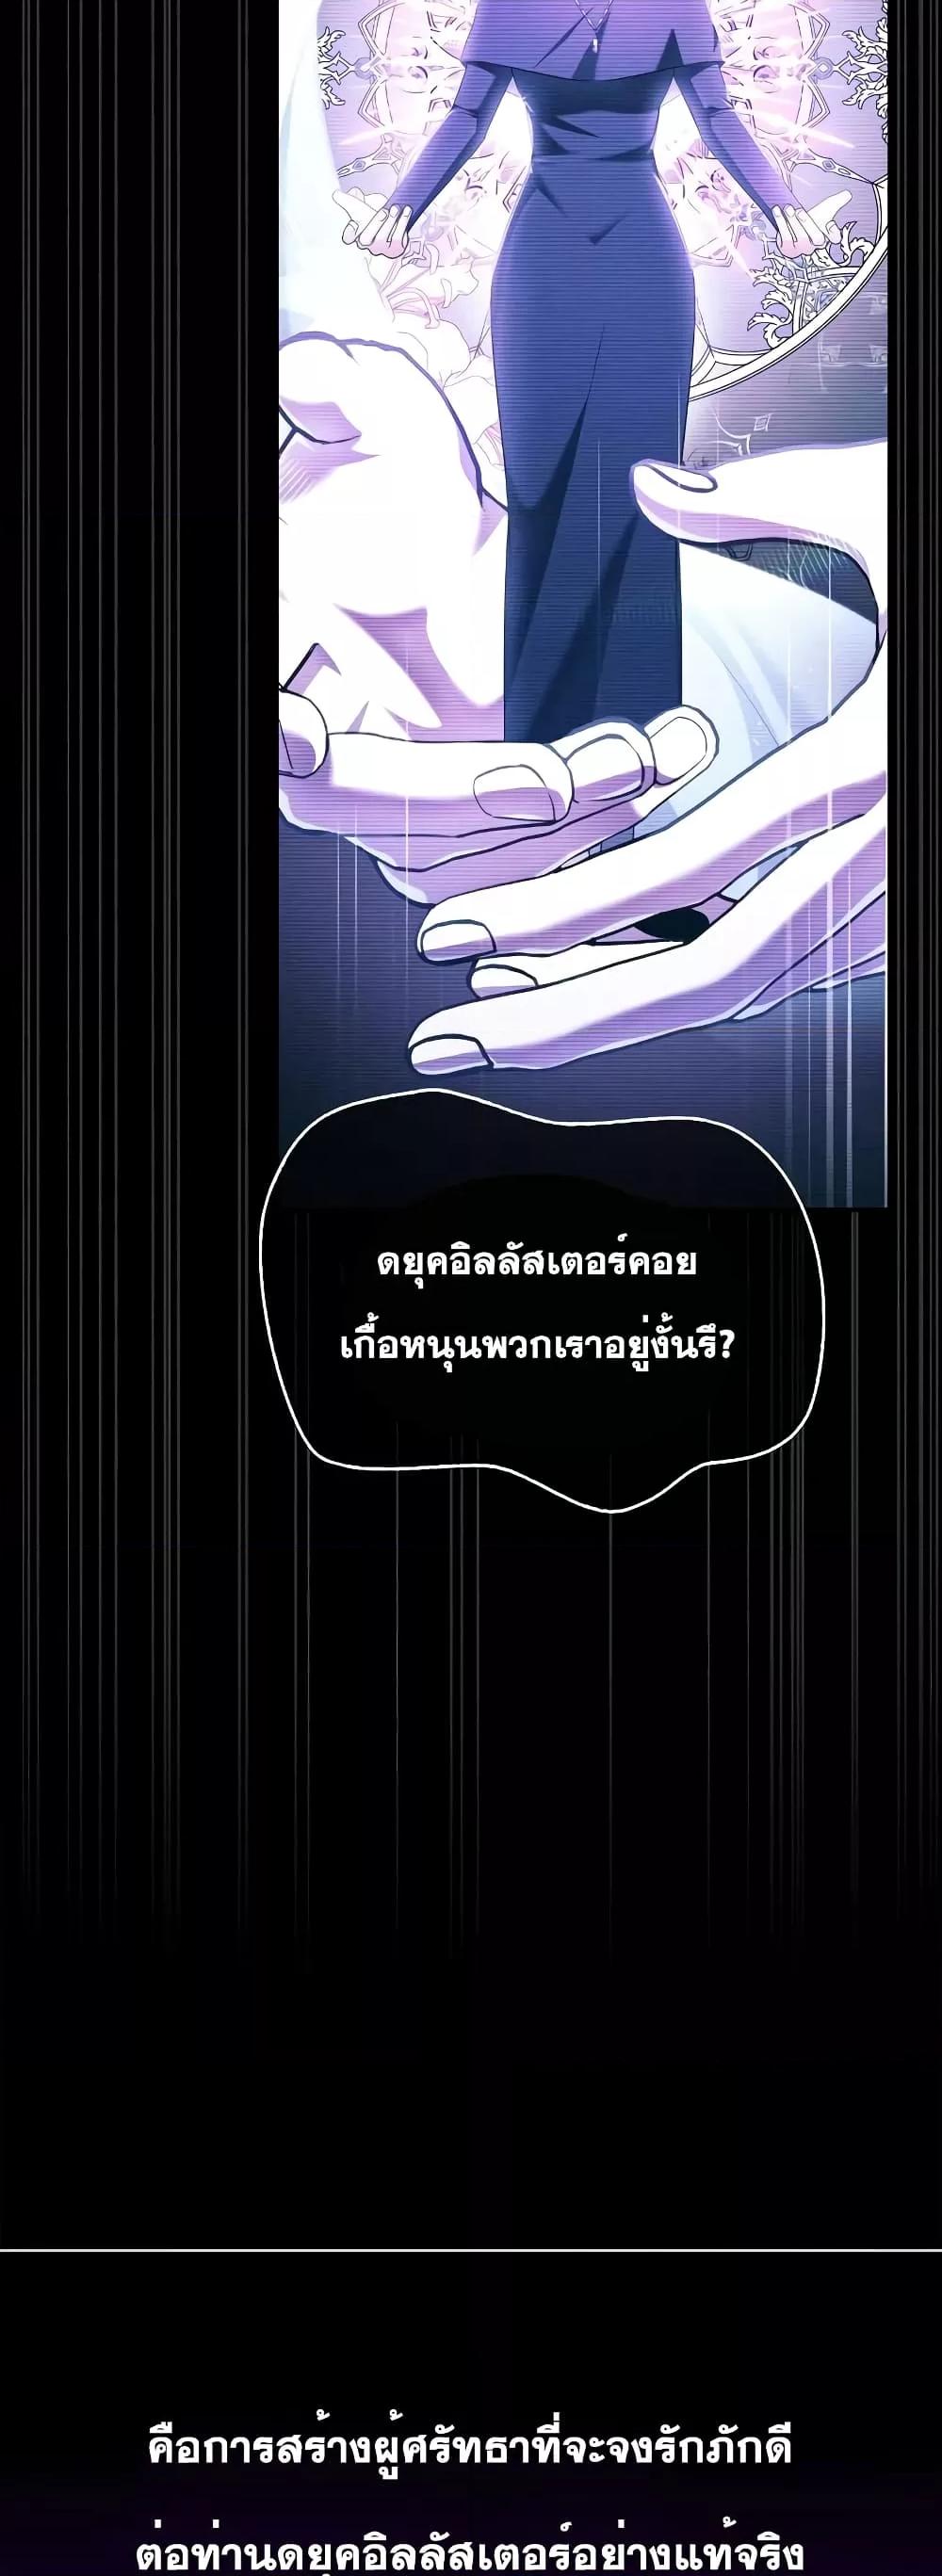 I’m Not That Kind of Talent ตอนที่ 34 026